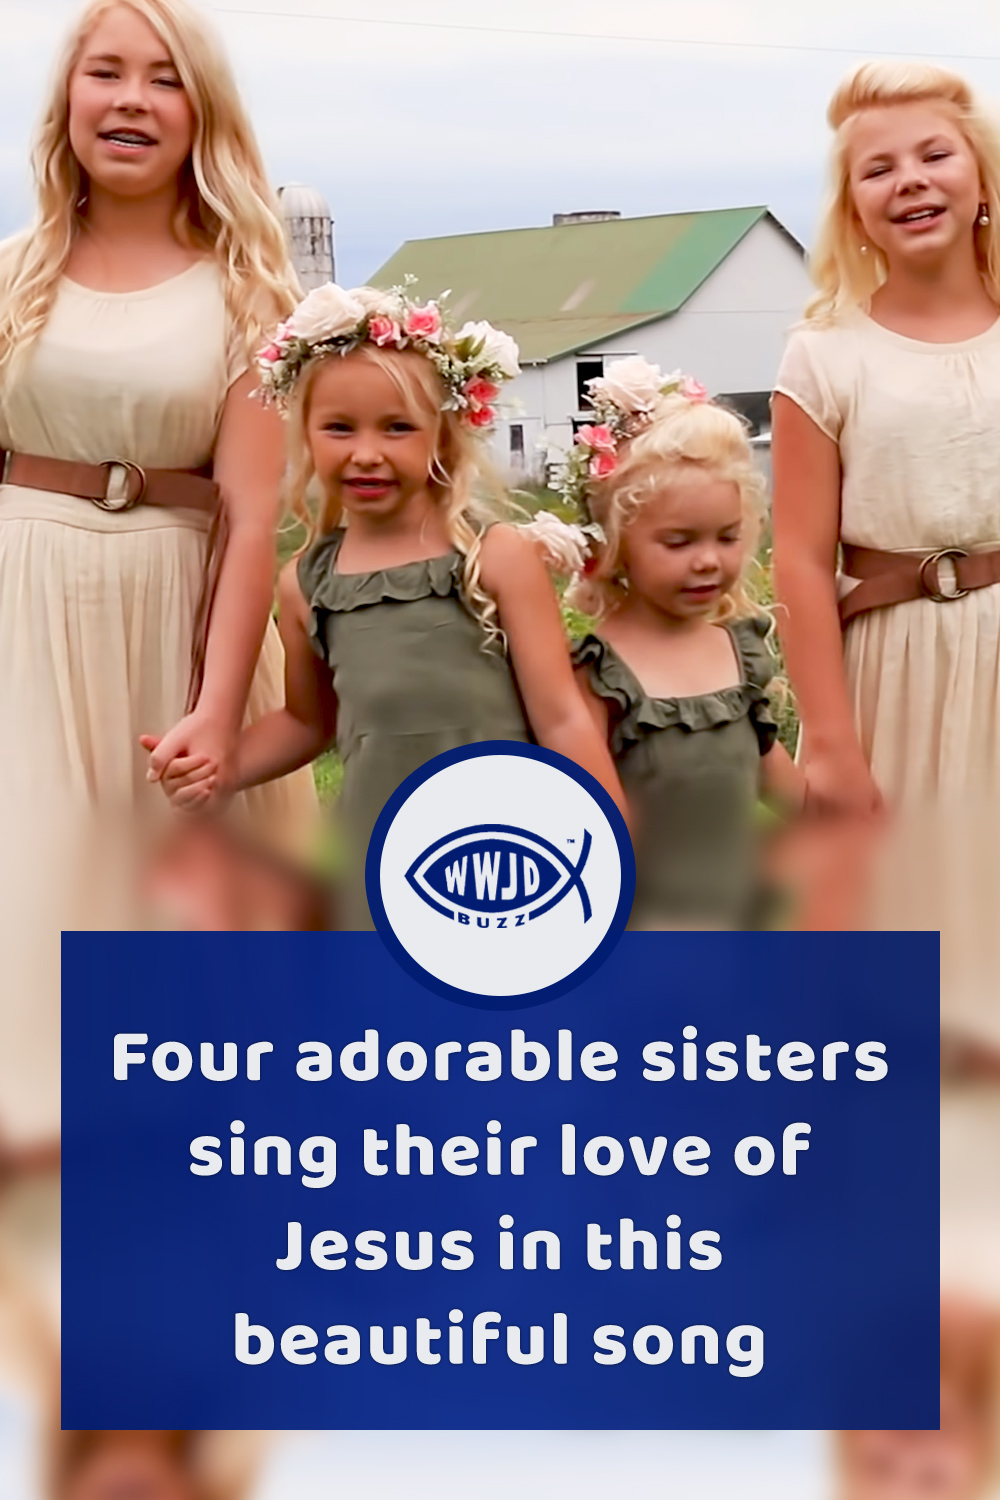 Four adorable sisters sing their love of Jesus in this beautiful song